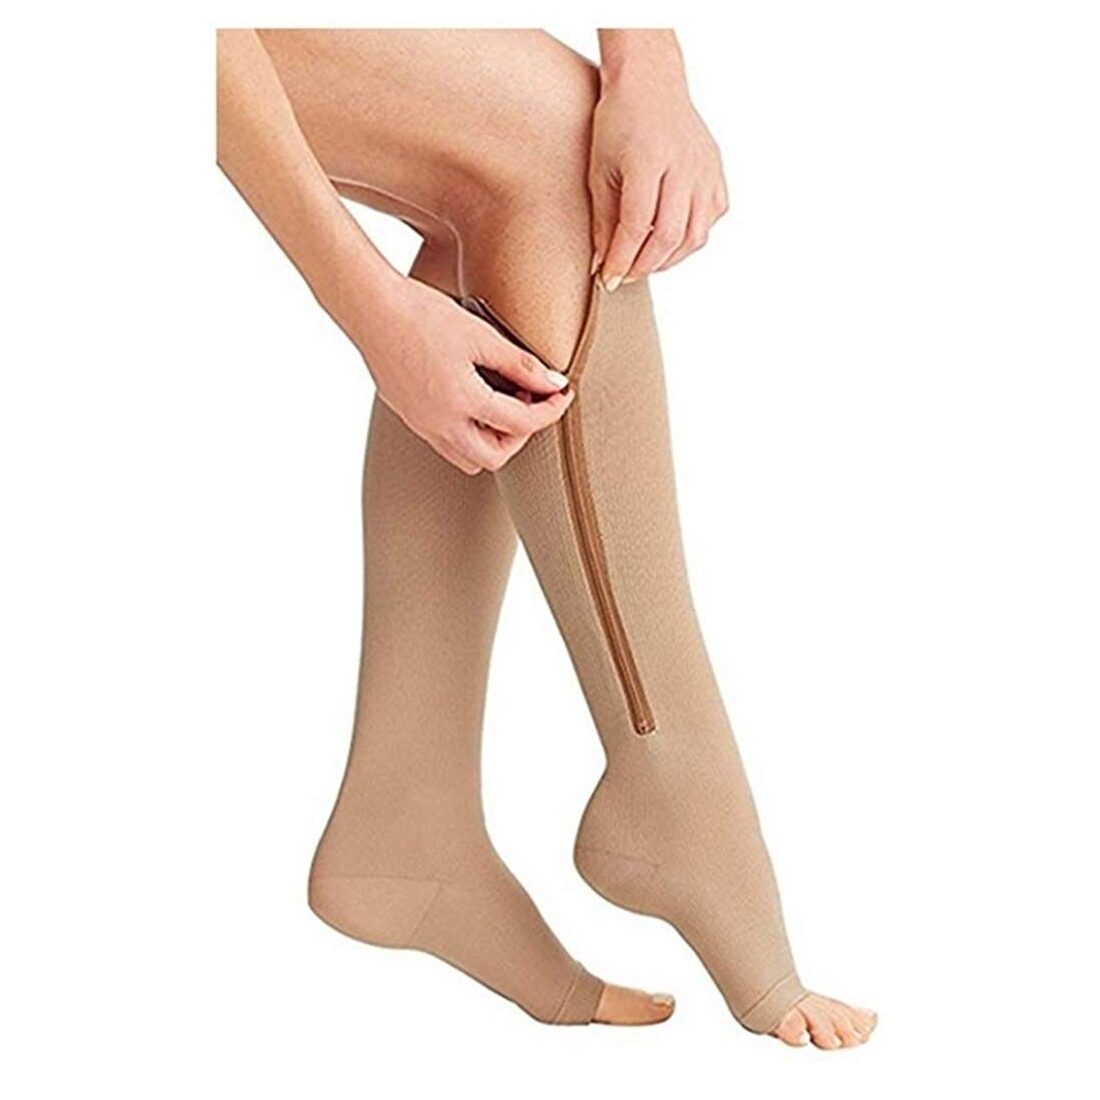 https://nuovahealth.co.uk/wp-content/uploads/2019/10/compression-support-stockings.jpg